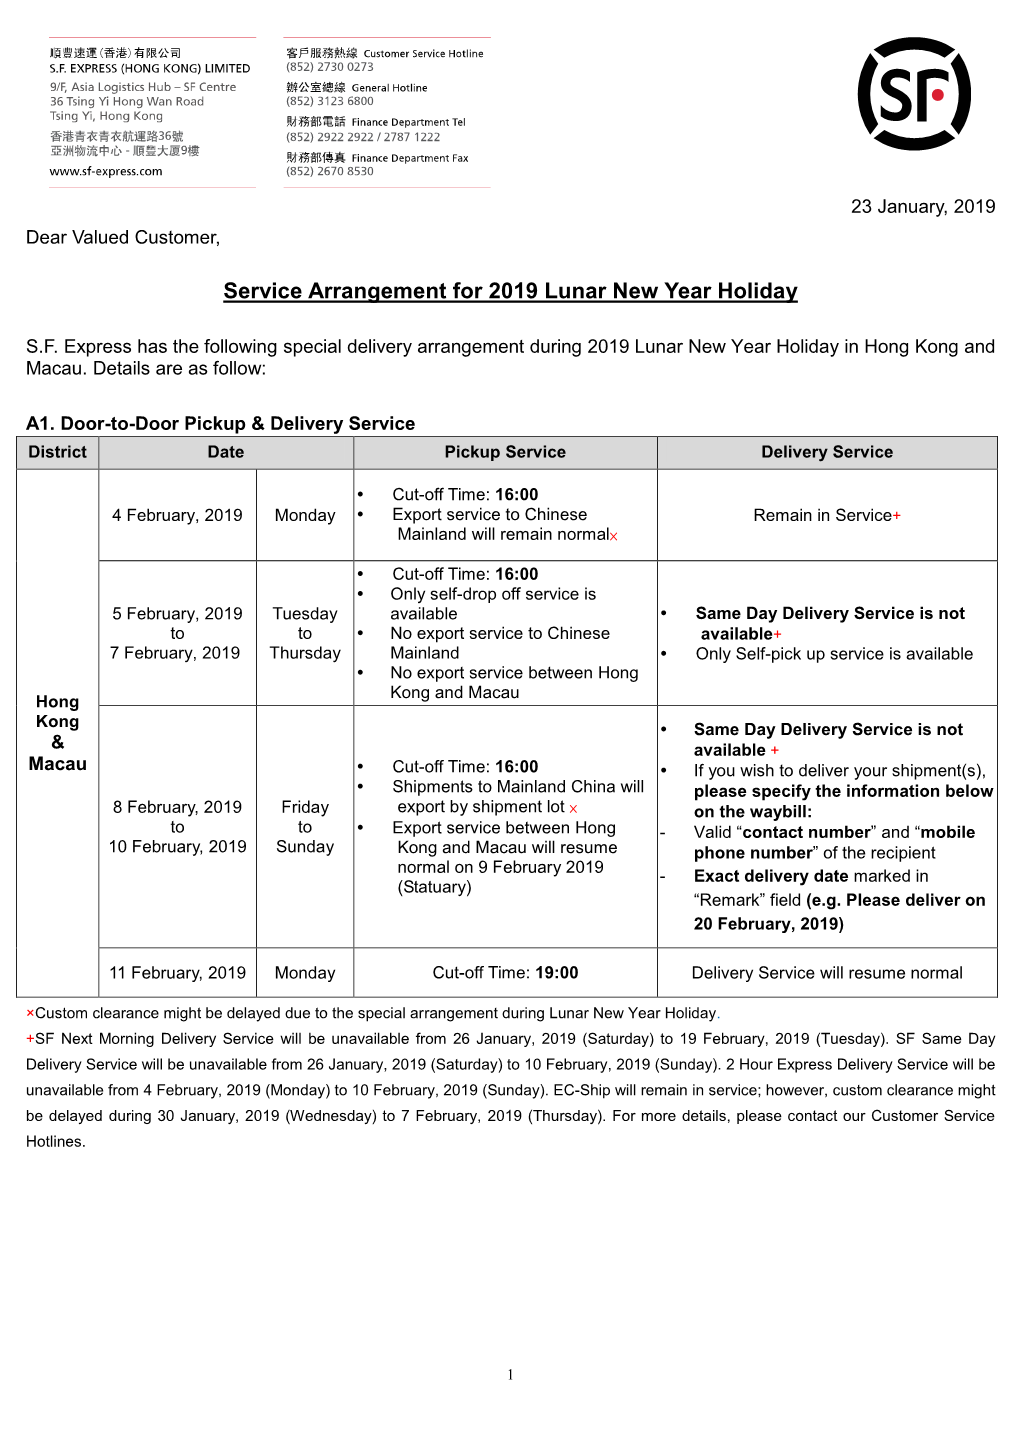 Service Arrangement for 2019 Lunar New Year Holiday